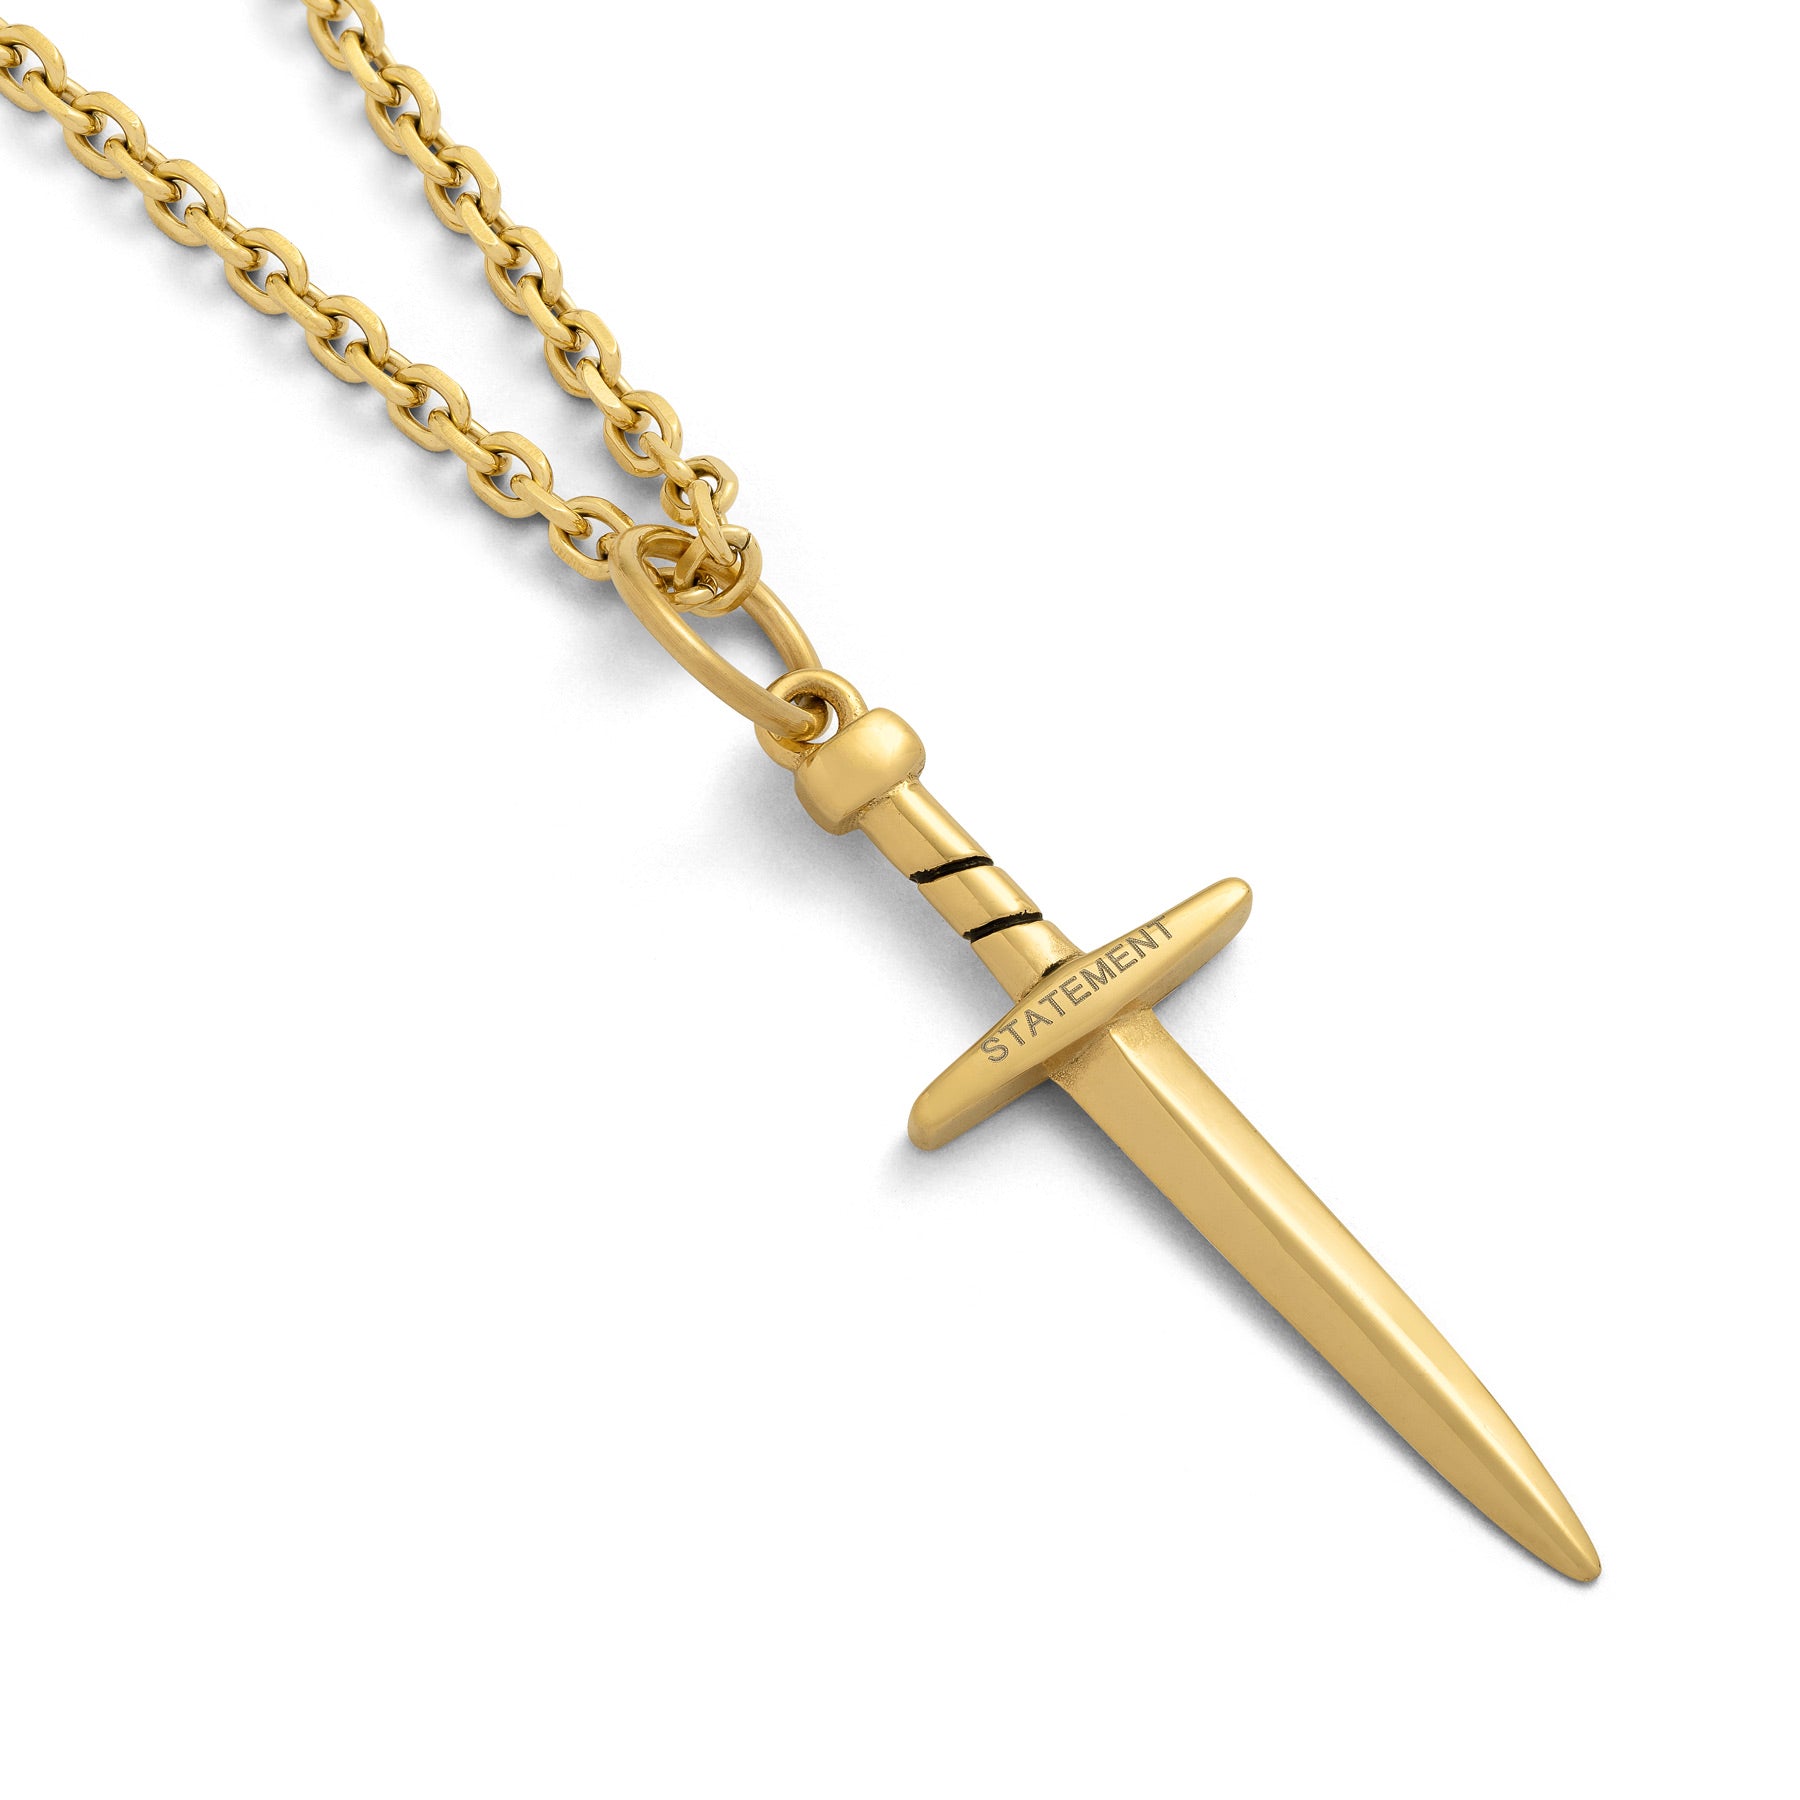 dagger necklace pendant by statement collective